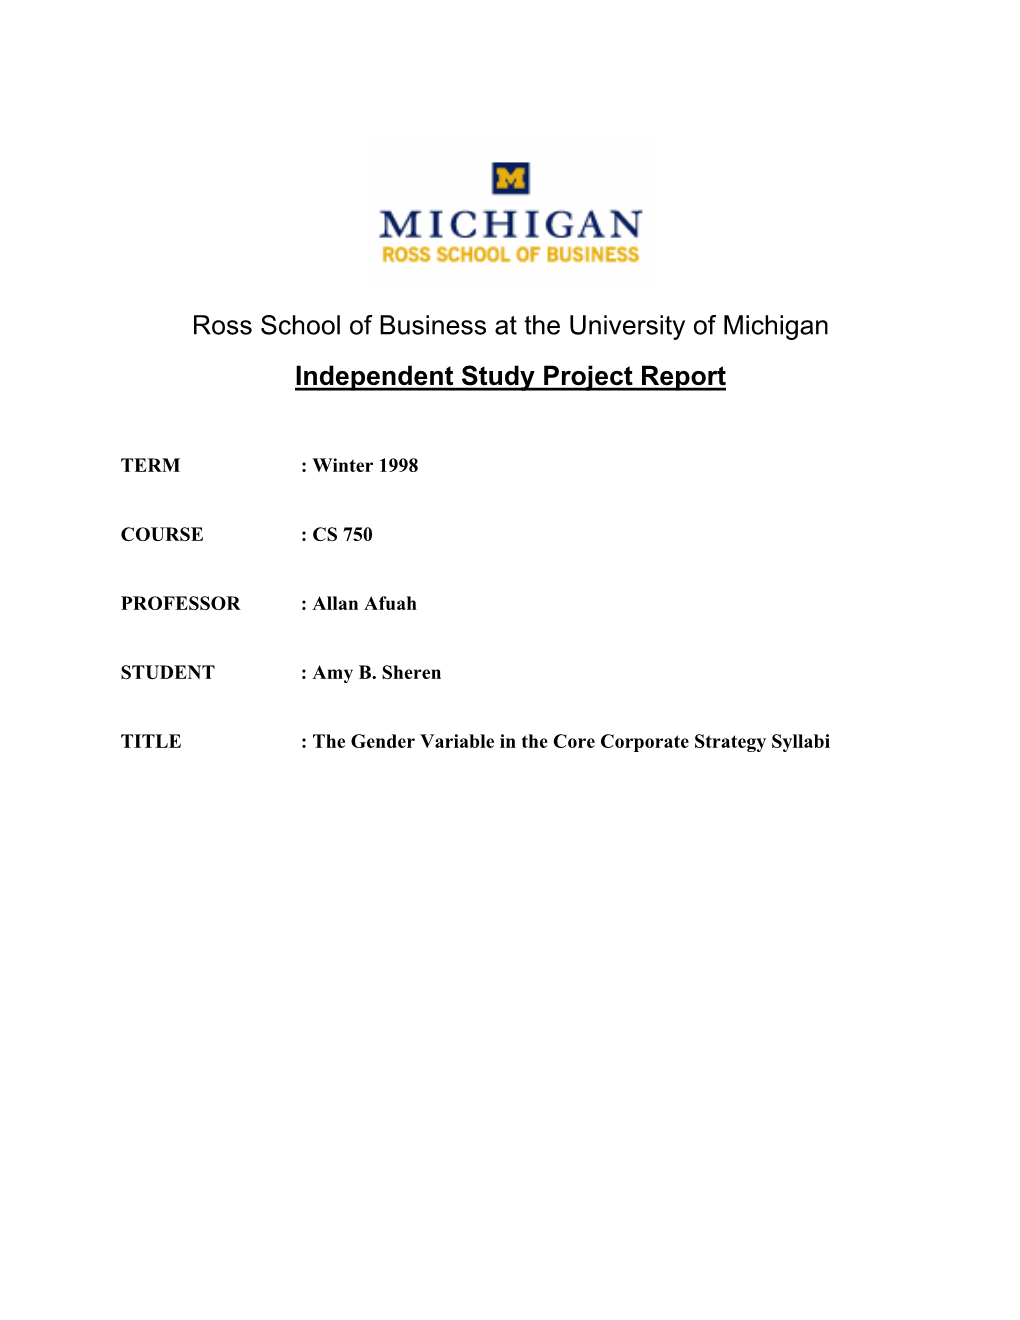 Ross School of Business at the University of Michigan Independent Study Project Report